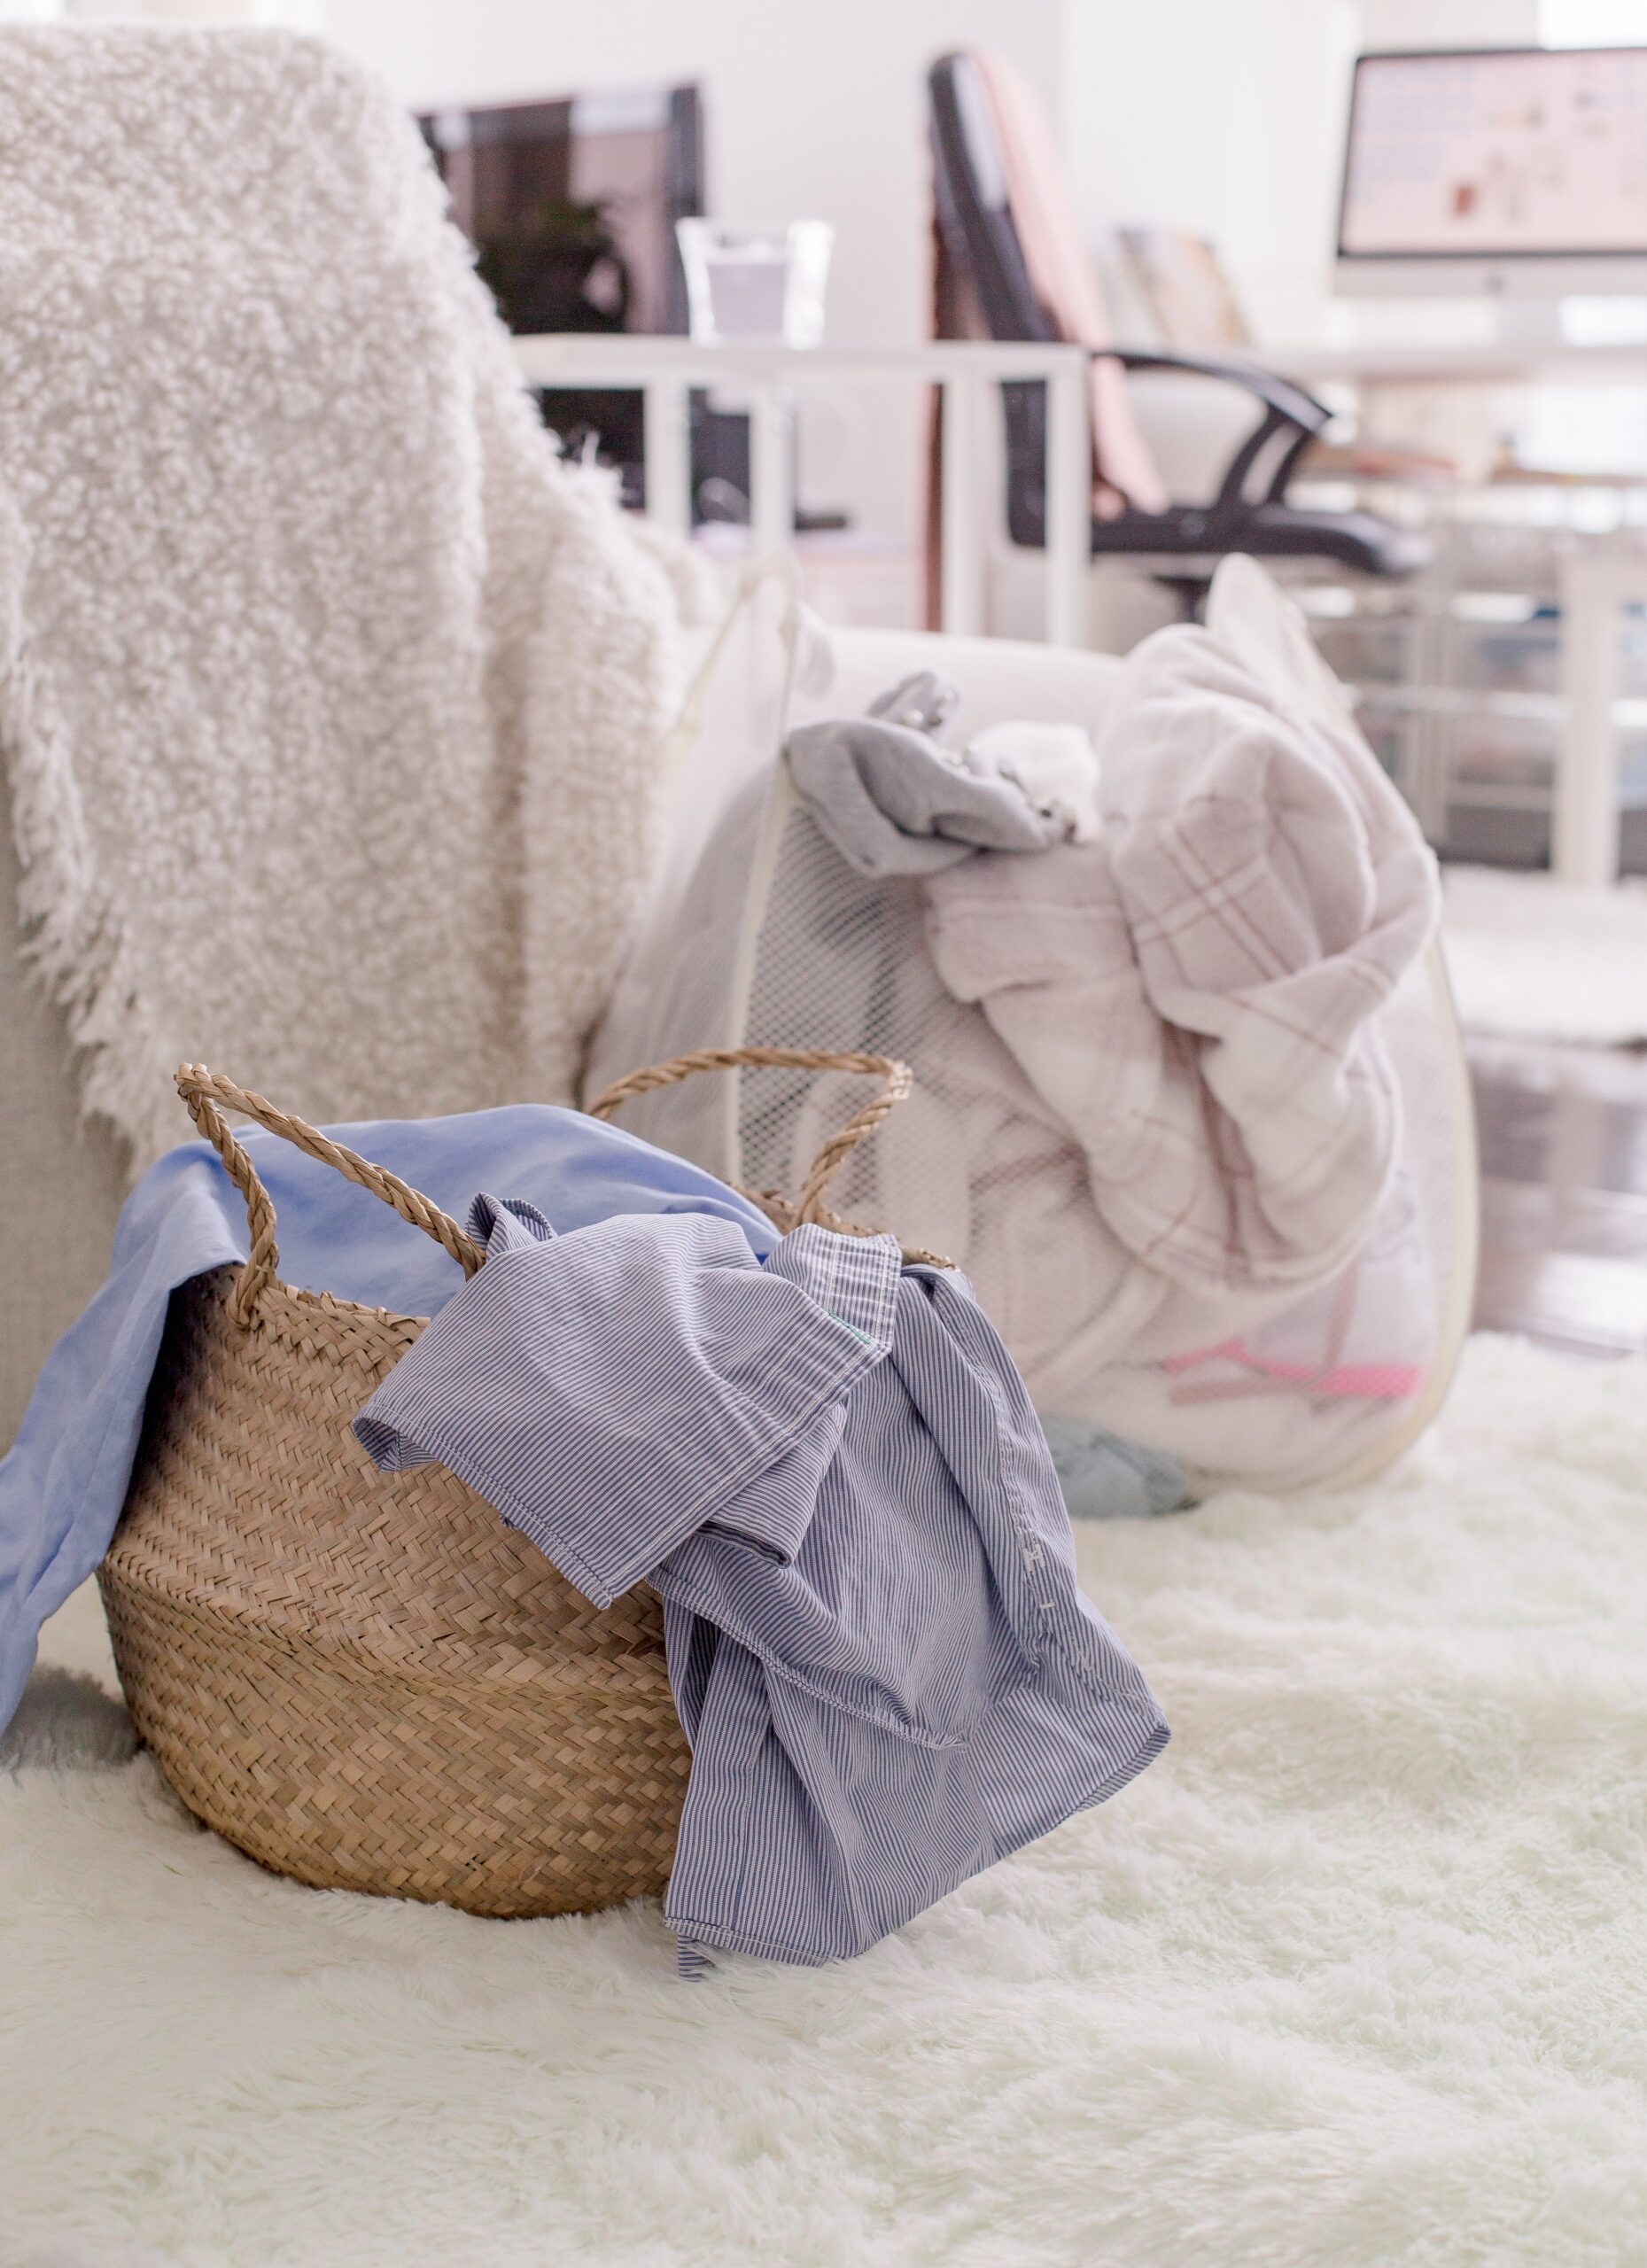 be neat by placing clothes in baskets